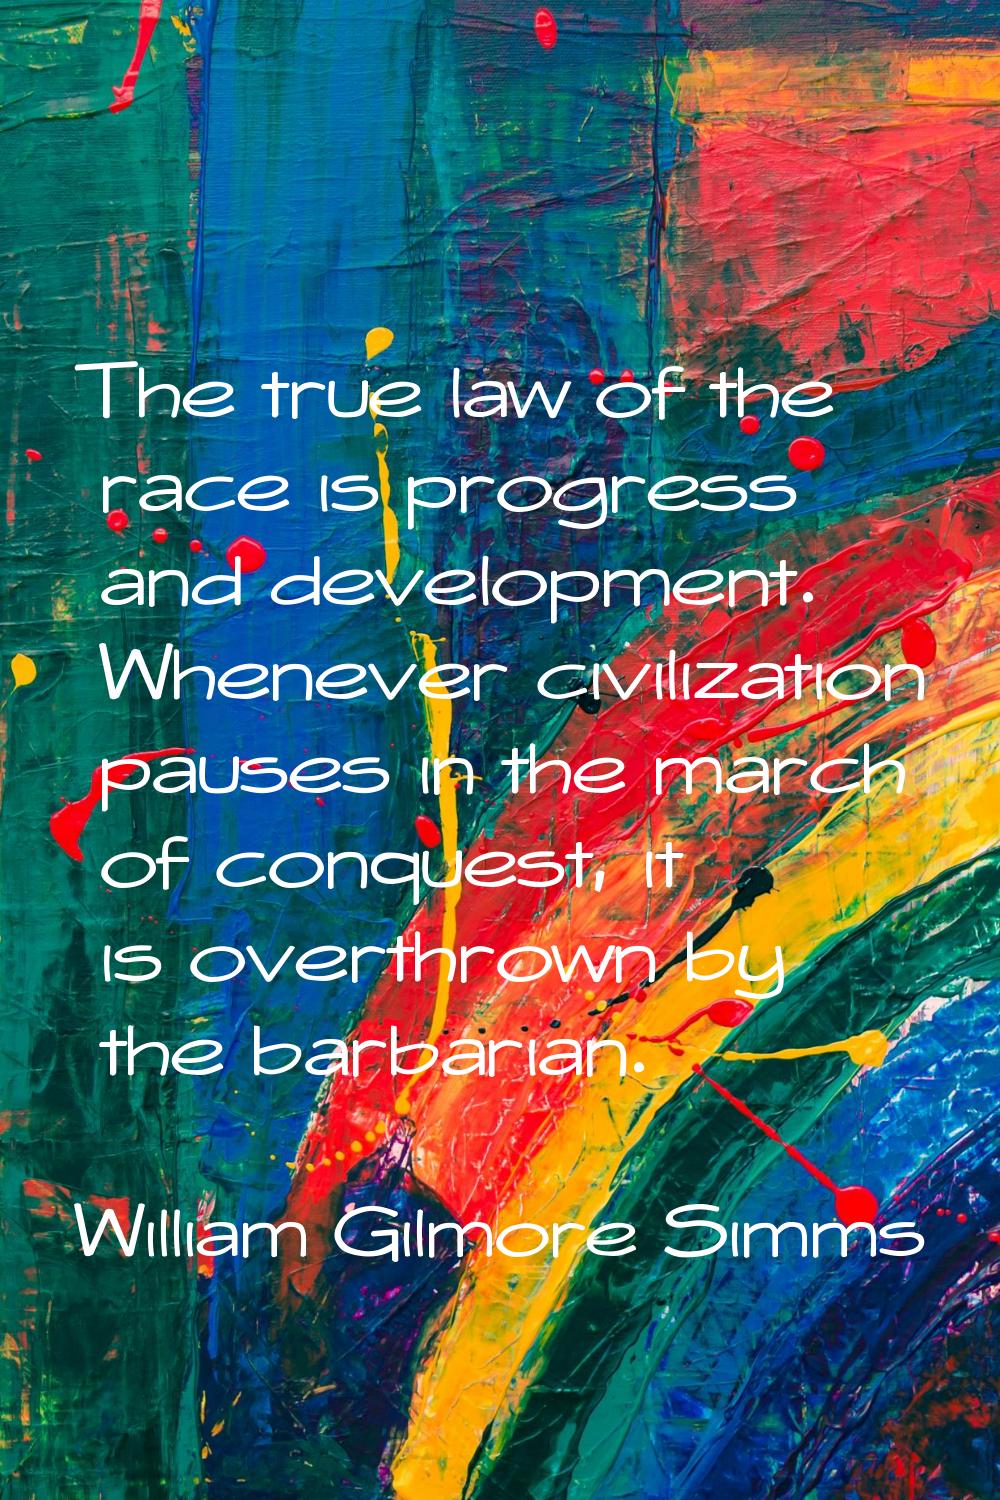 The true law of the race is progress and development. Whenever civilization pauses in the march of 